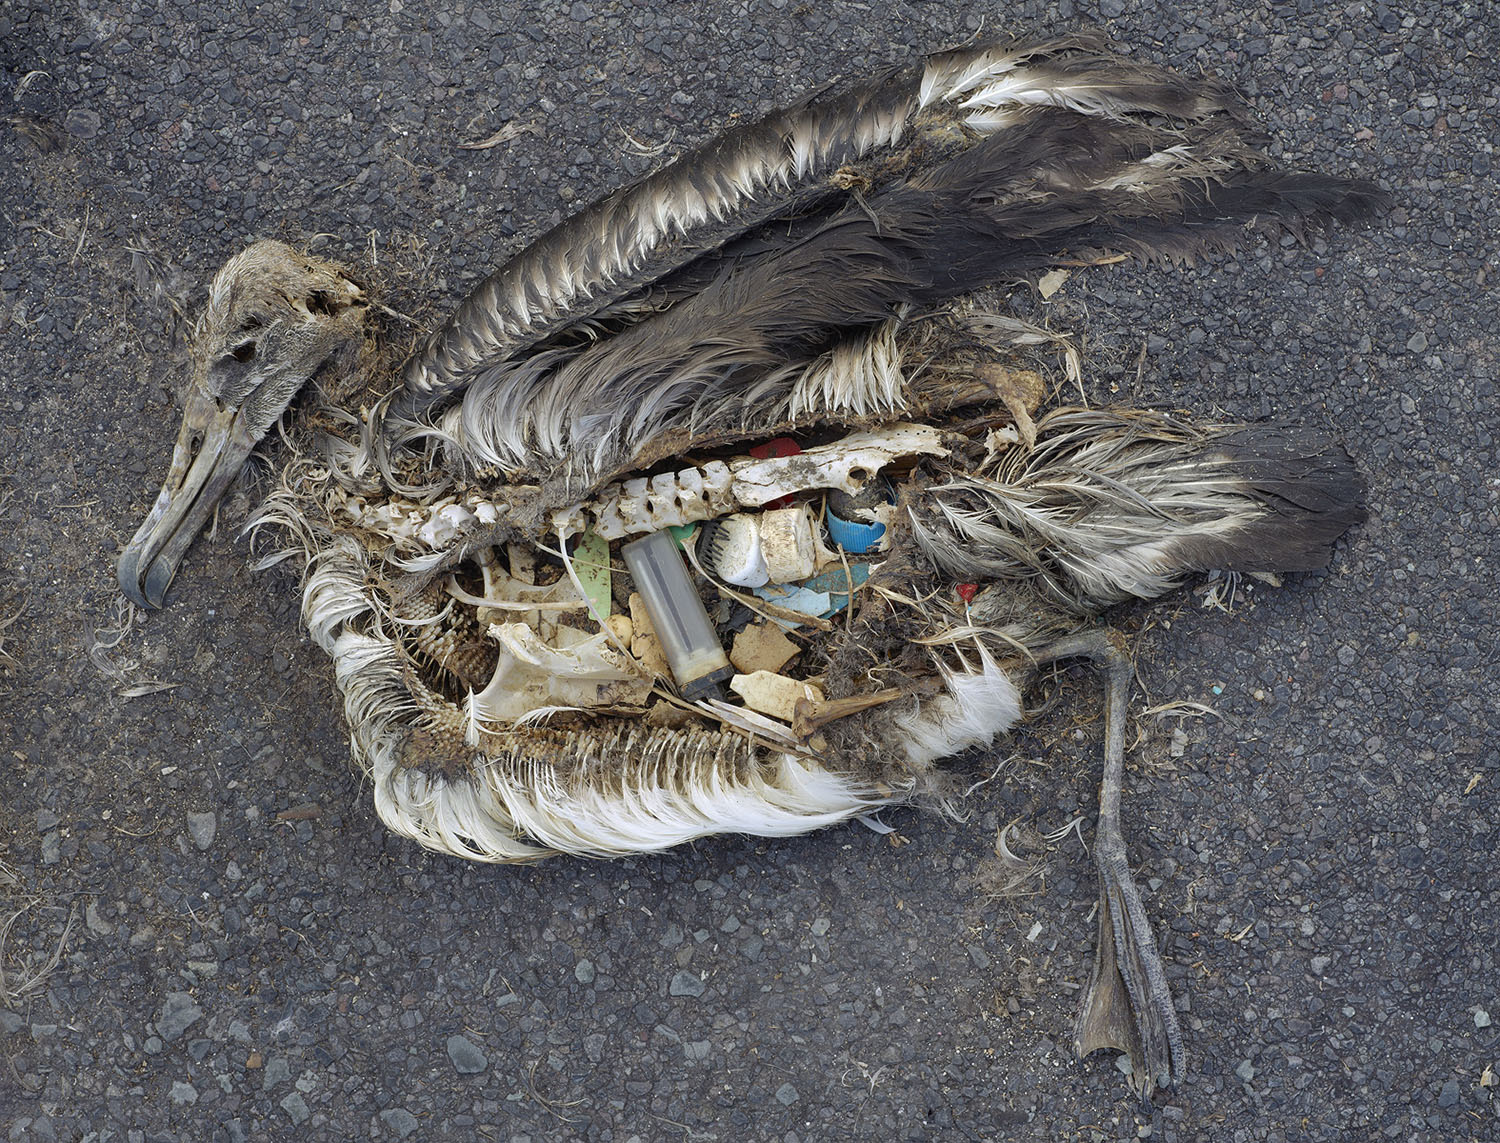 Chris Jordan, CF000313, unaltered stomach contents of juvenile Laysan albatross, from the series Midway: Message from the Gyre, 2009. Pigment print. Courtesy of the artist.